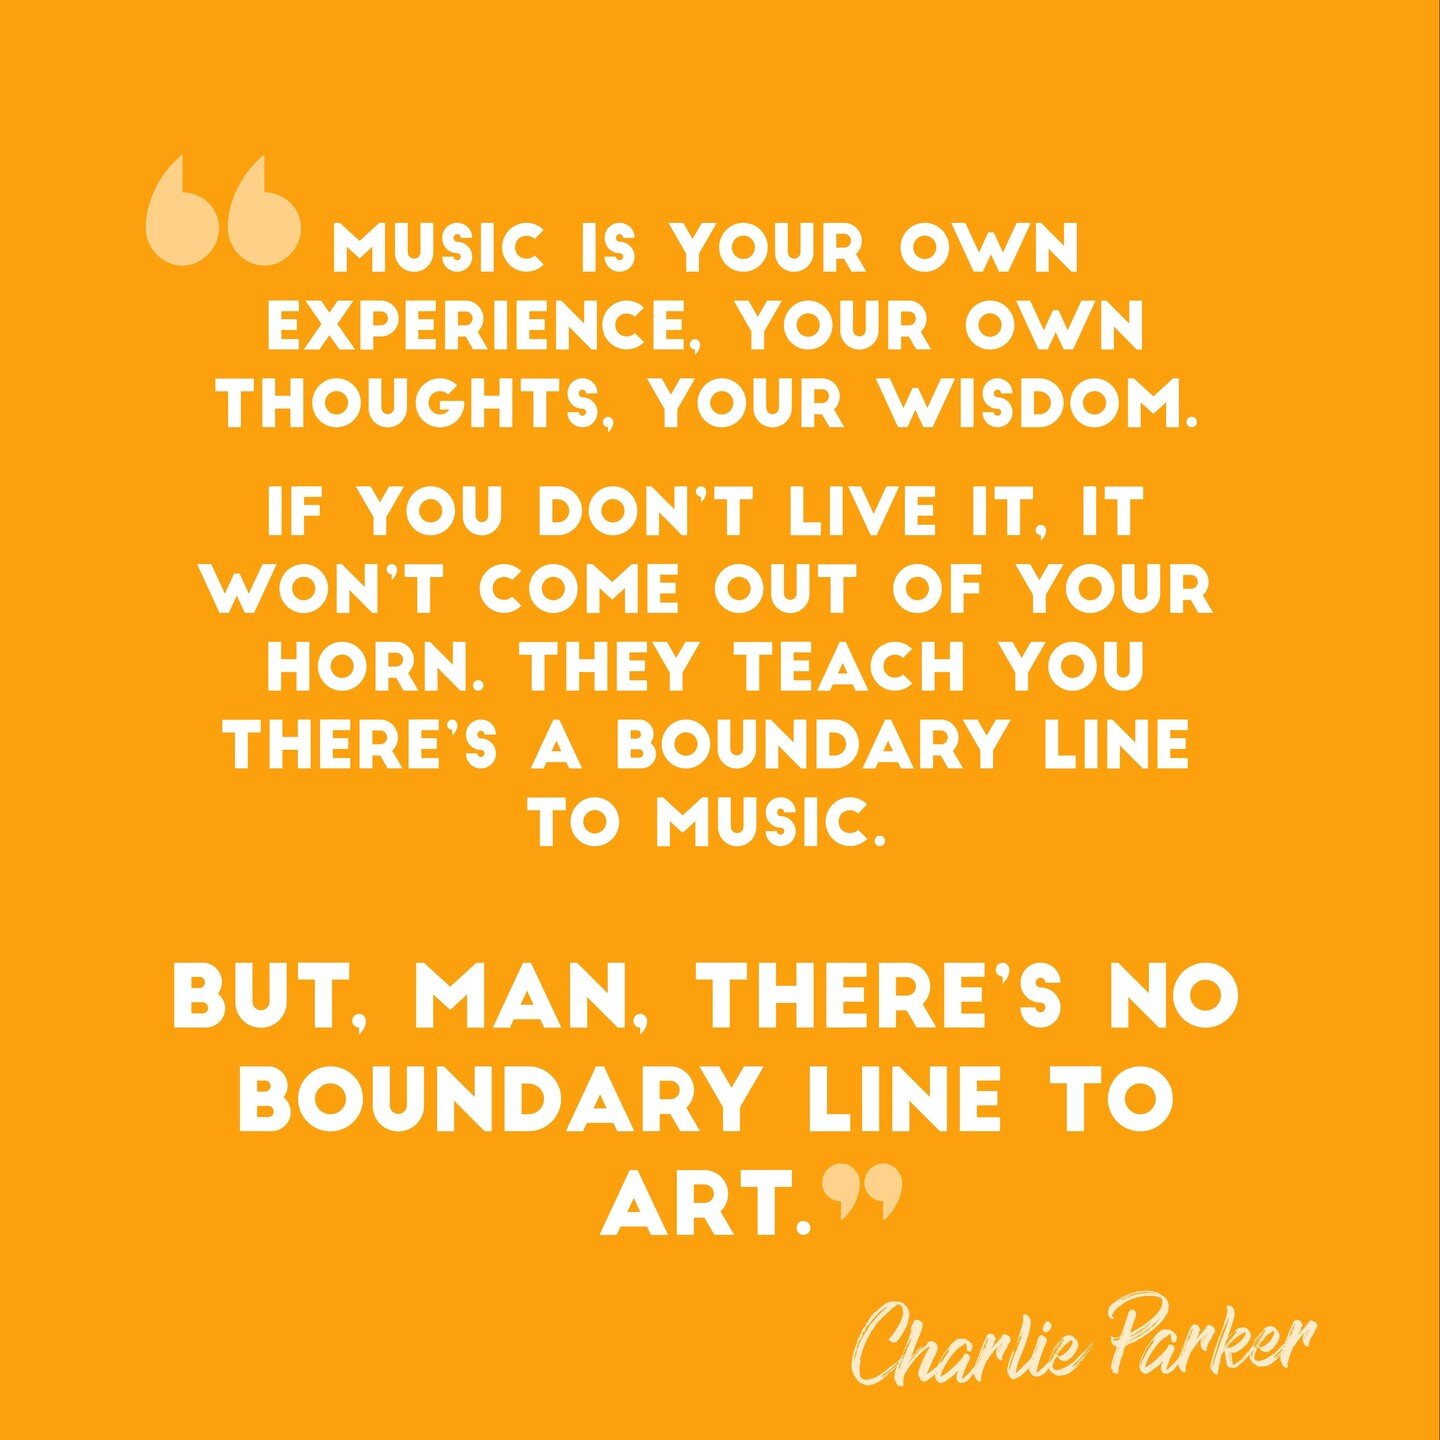 &ldquo;Music is your own experience, your own thoughts, your wisdom. If you don&rsquo;t live it, it won&rsquo;t come out of your horn. They teach you there&rsquo;s a boundary line to music. But, man, there&rsquo;s no boundary line to art&rdquo; 

&nd